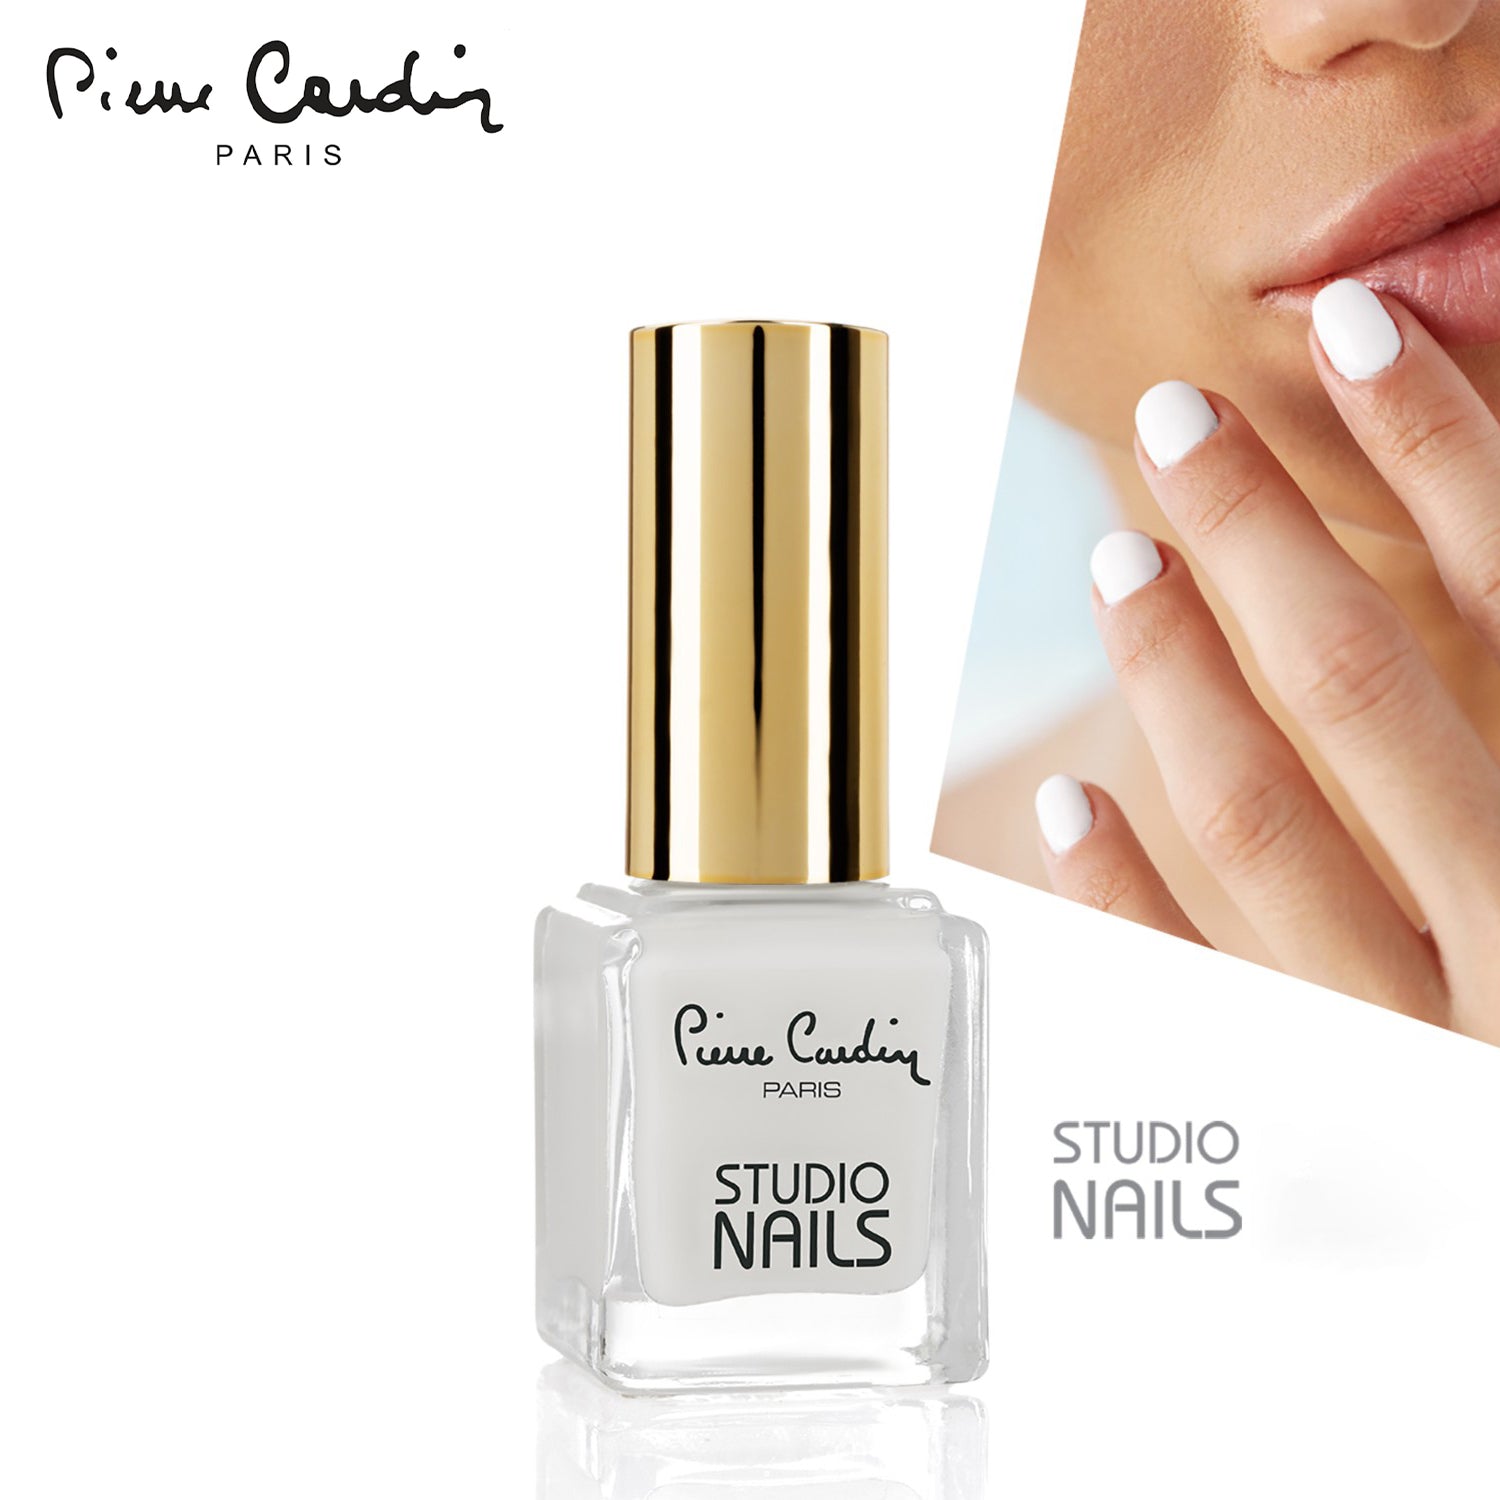 Share more than 220 pierre cardin nail polish best